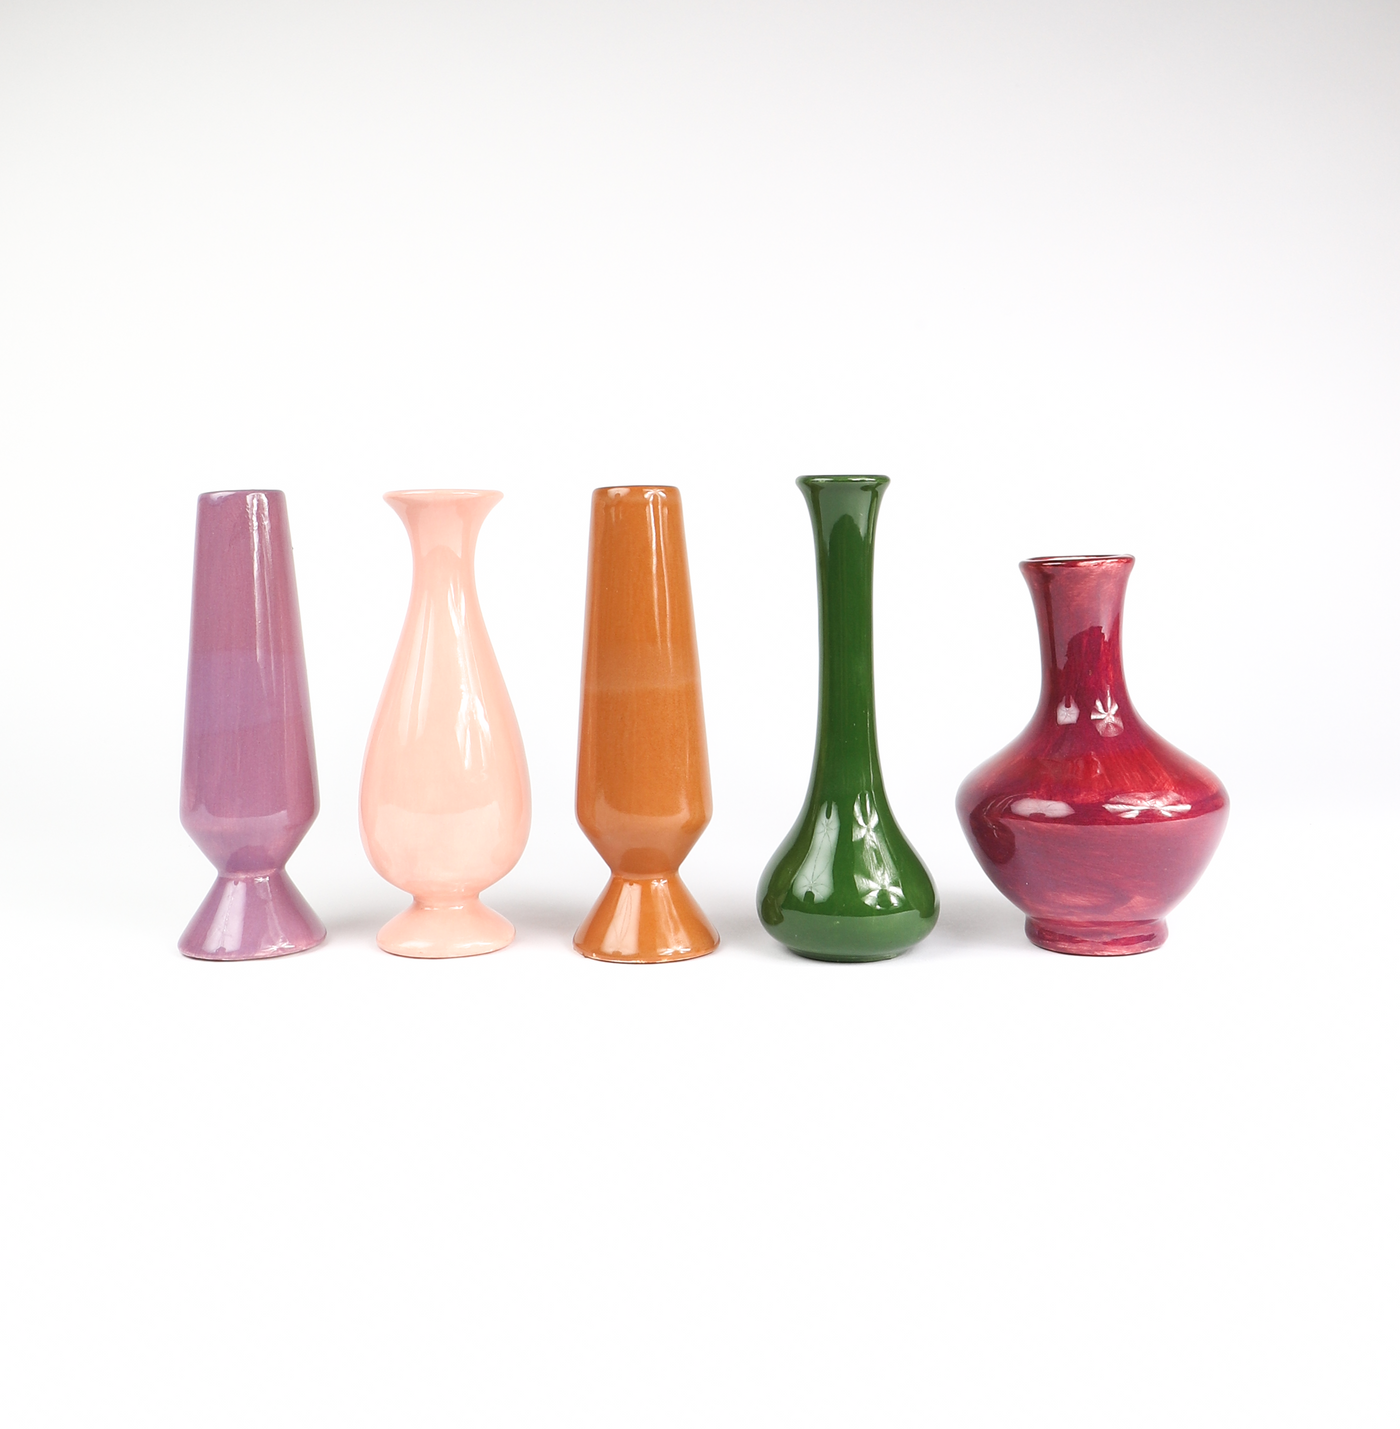 JEWEL BUD VASES (sold out)